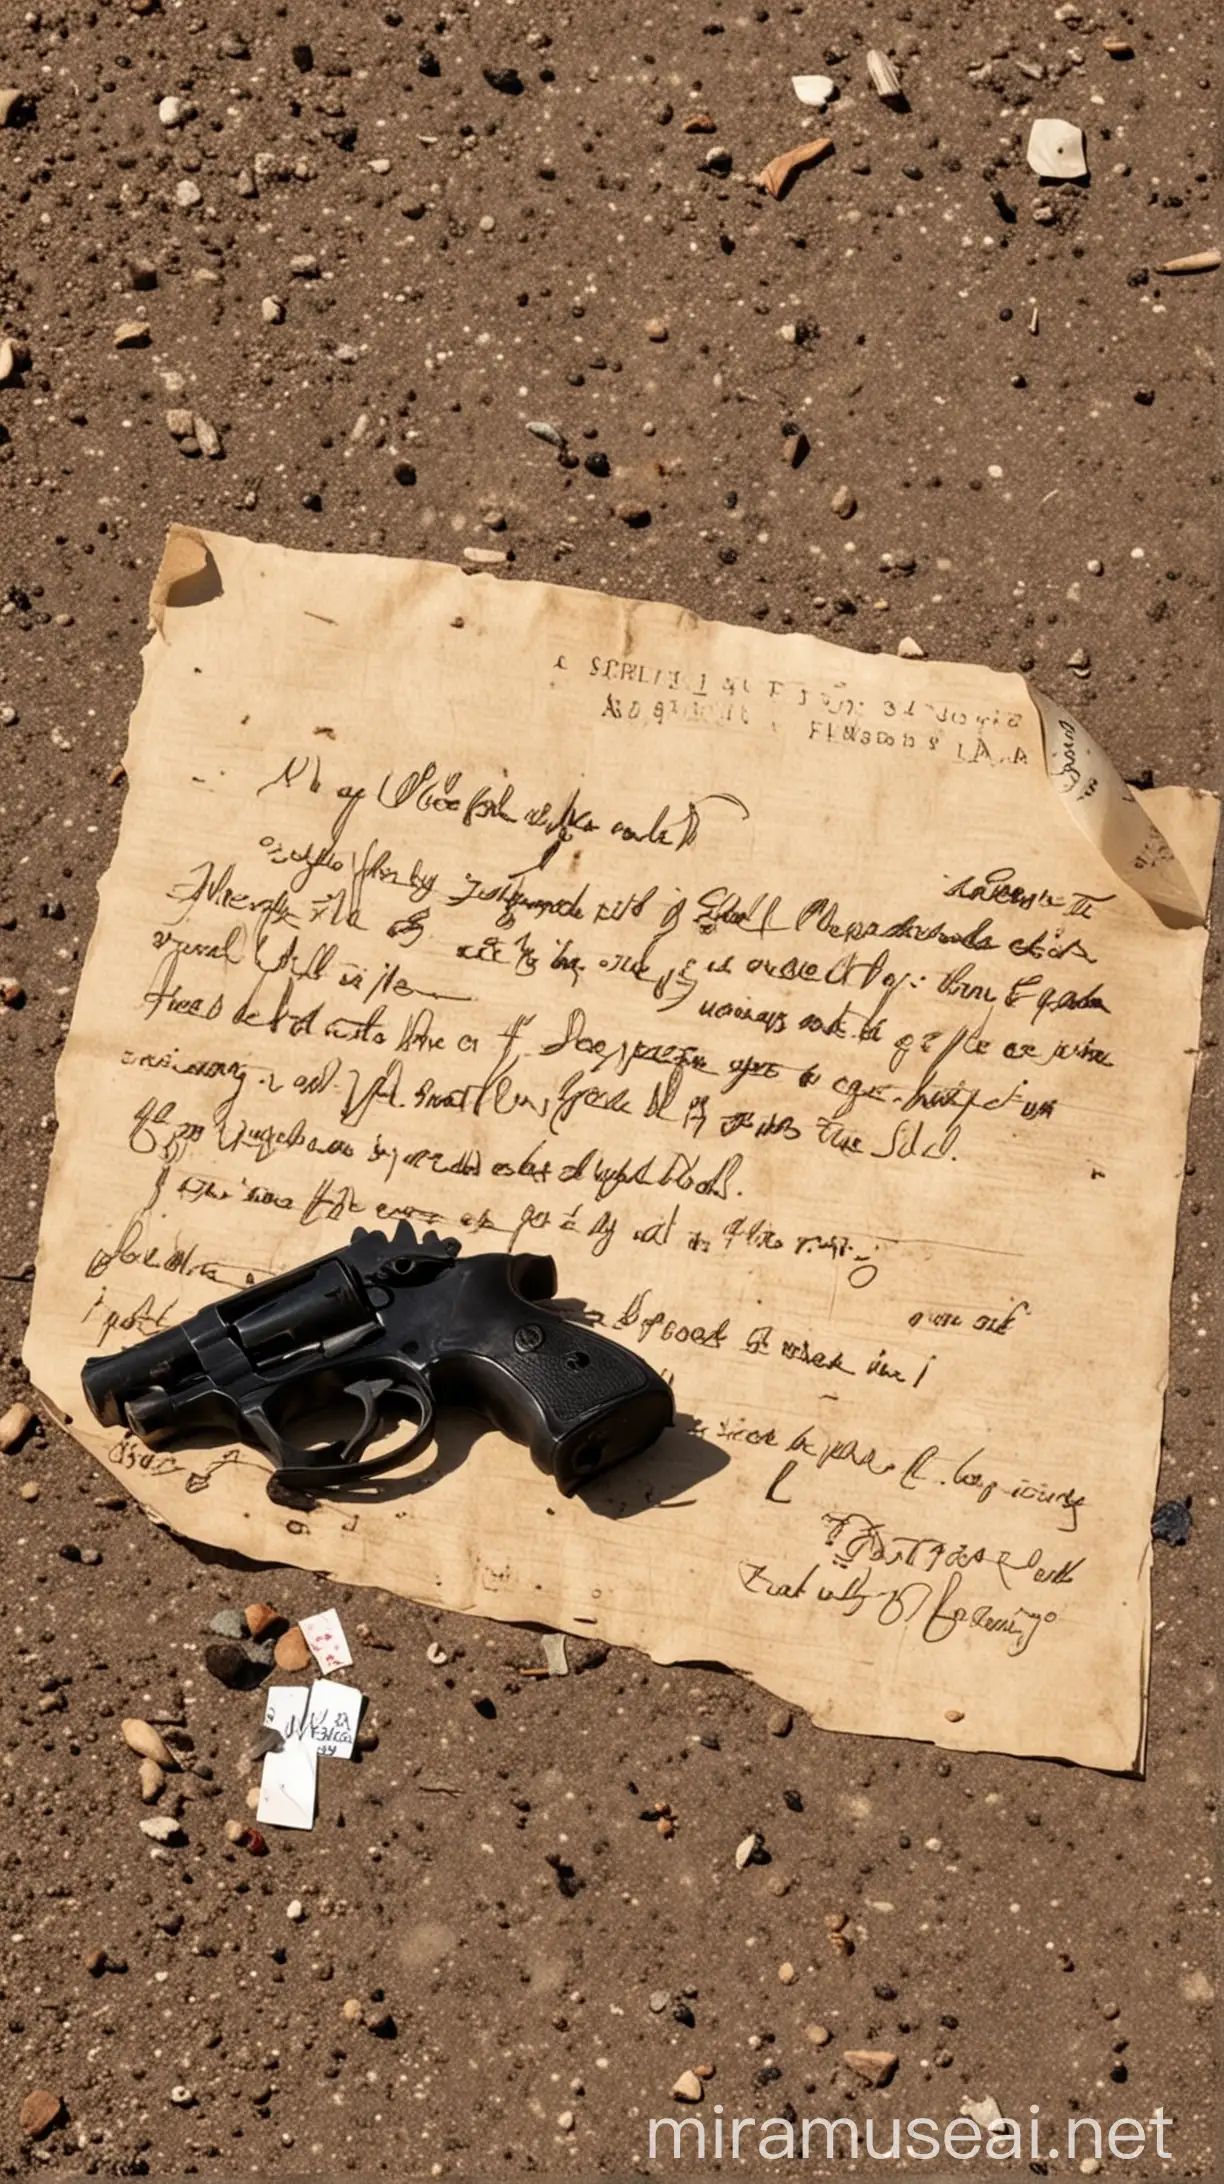 A gun and a letter are found on the dead man on the ground.